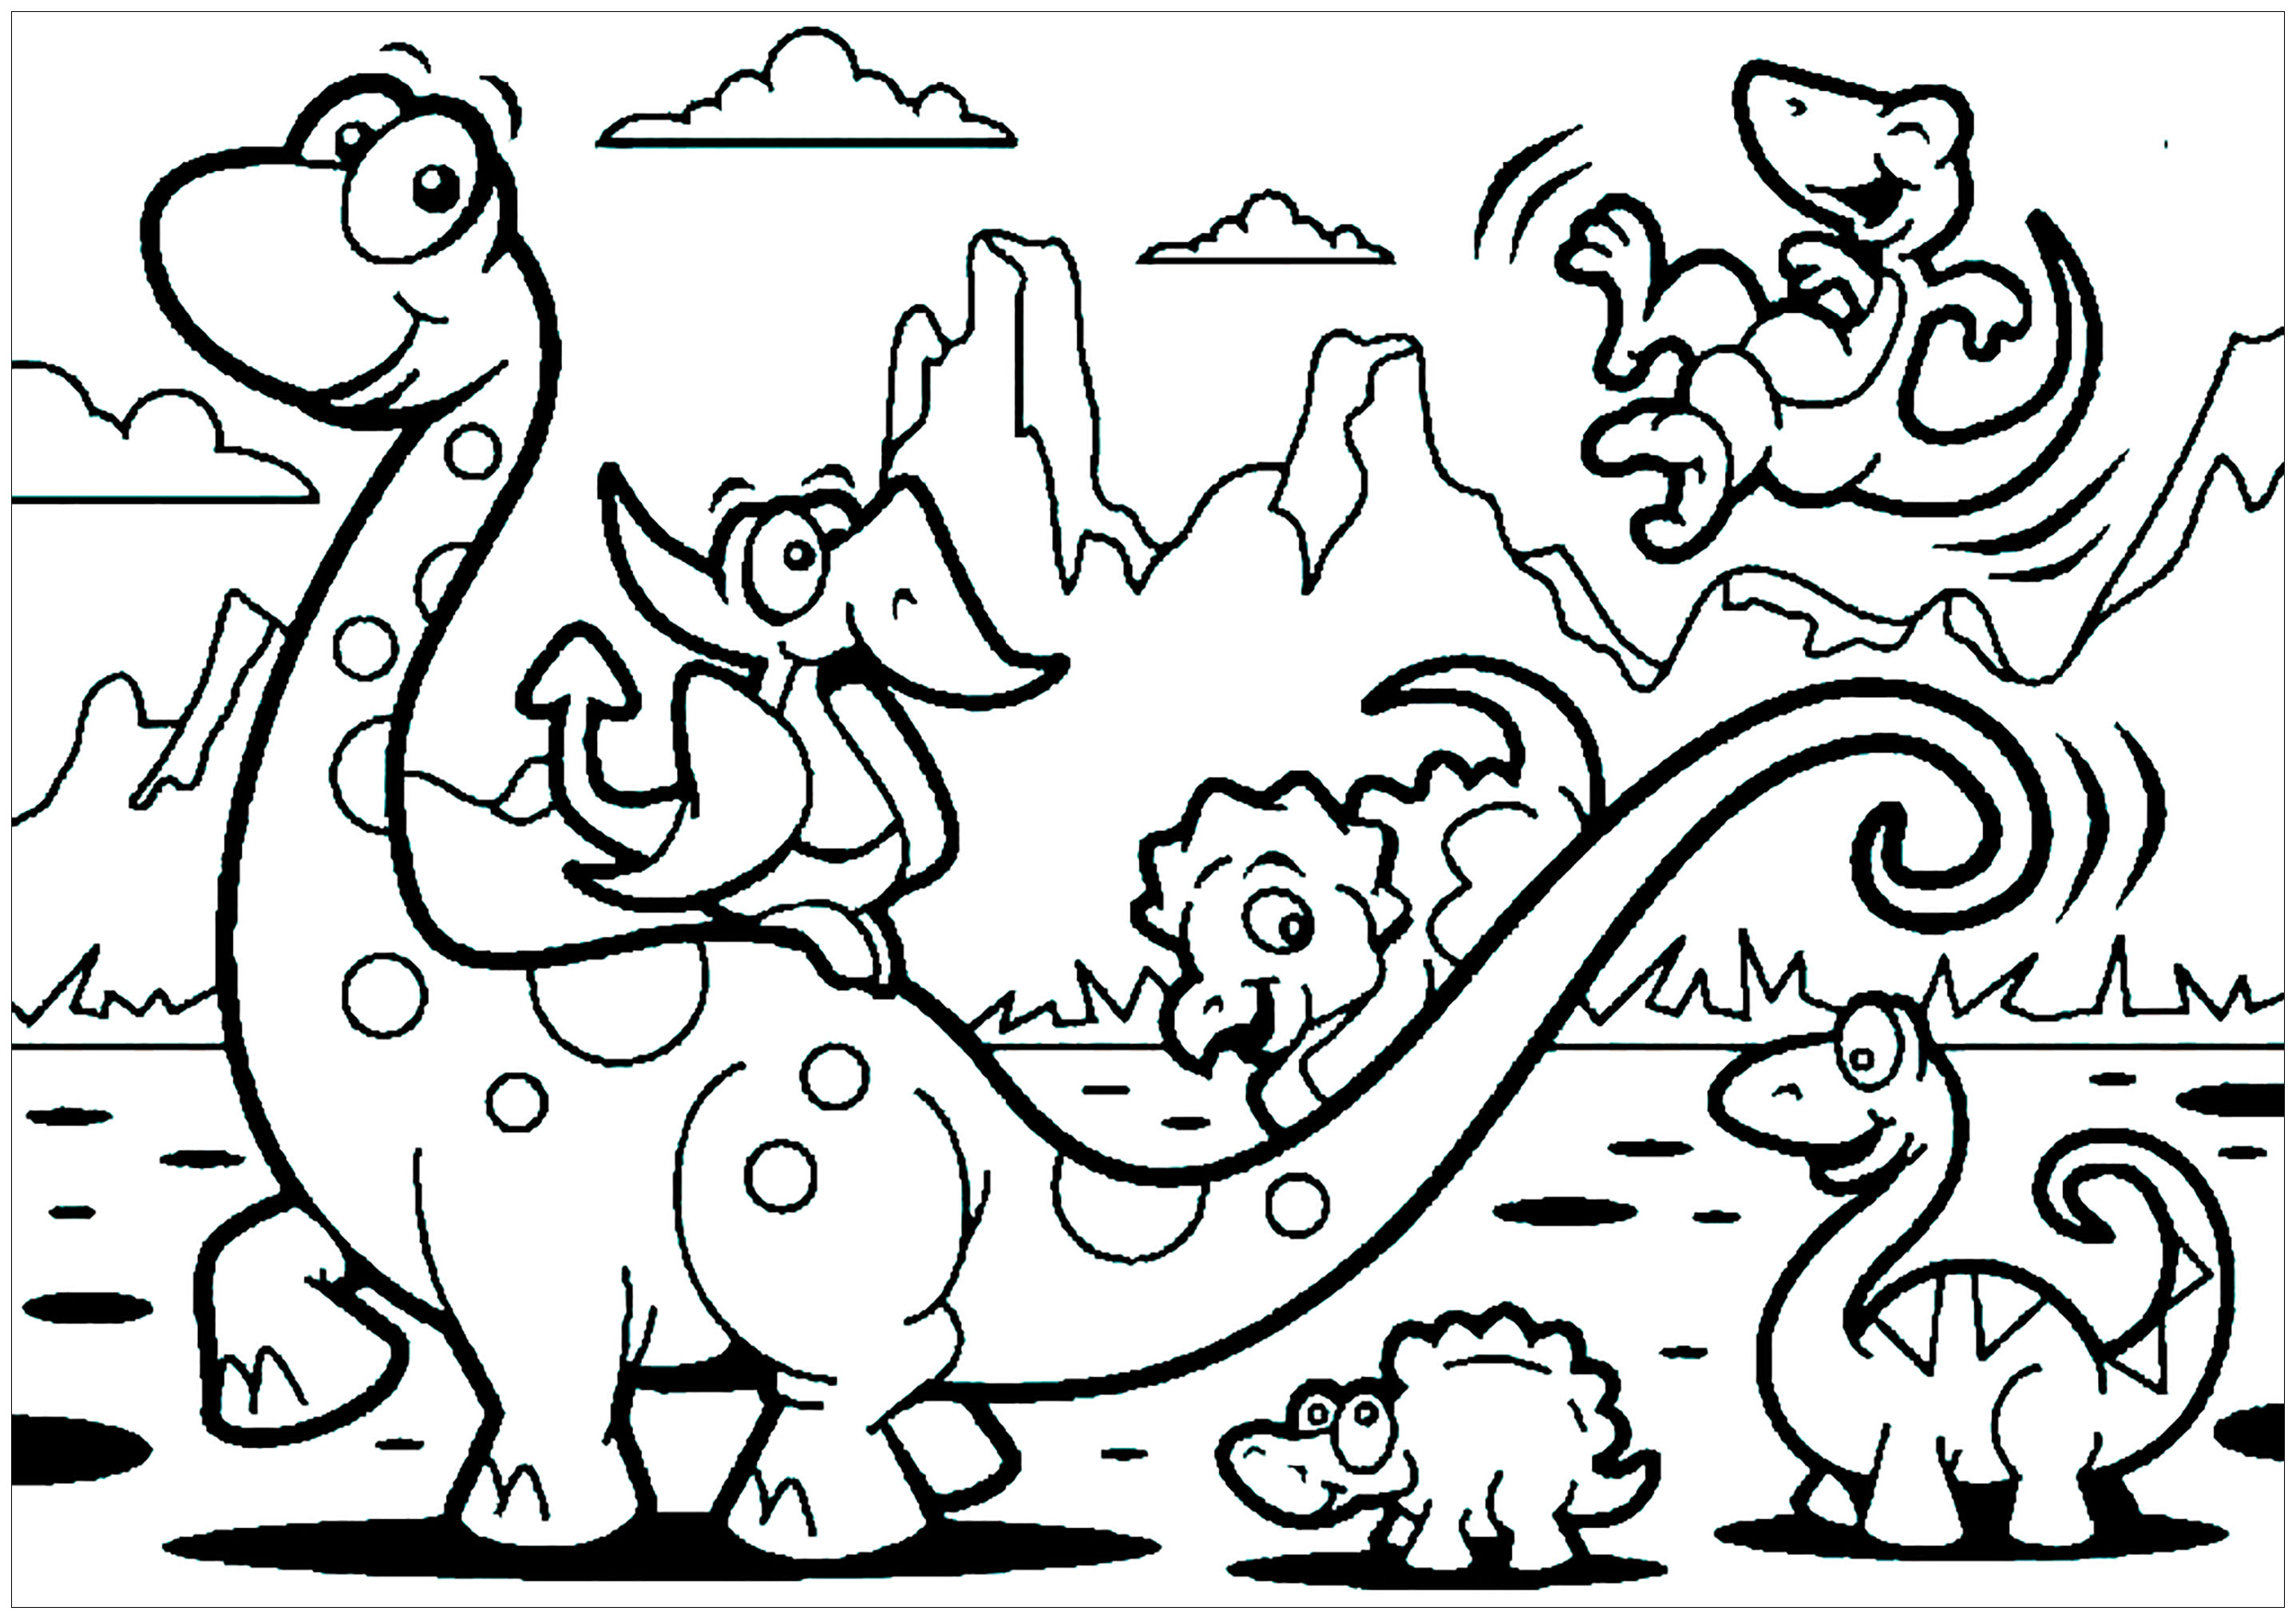   Dinosaur  Pictures For Kids To Color  These free  